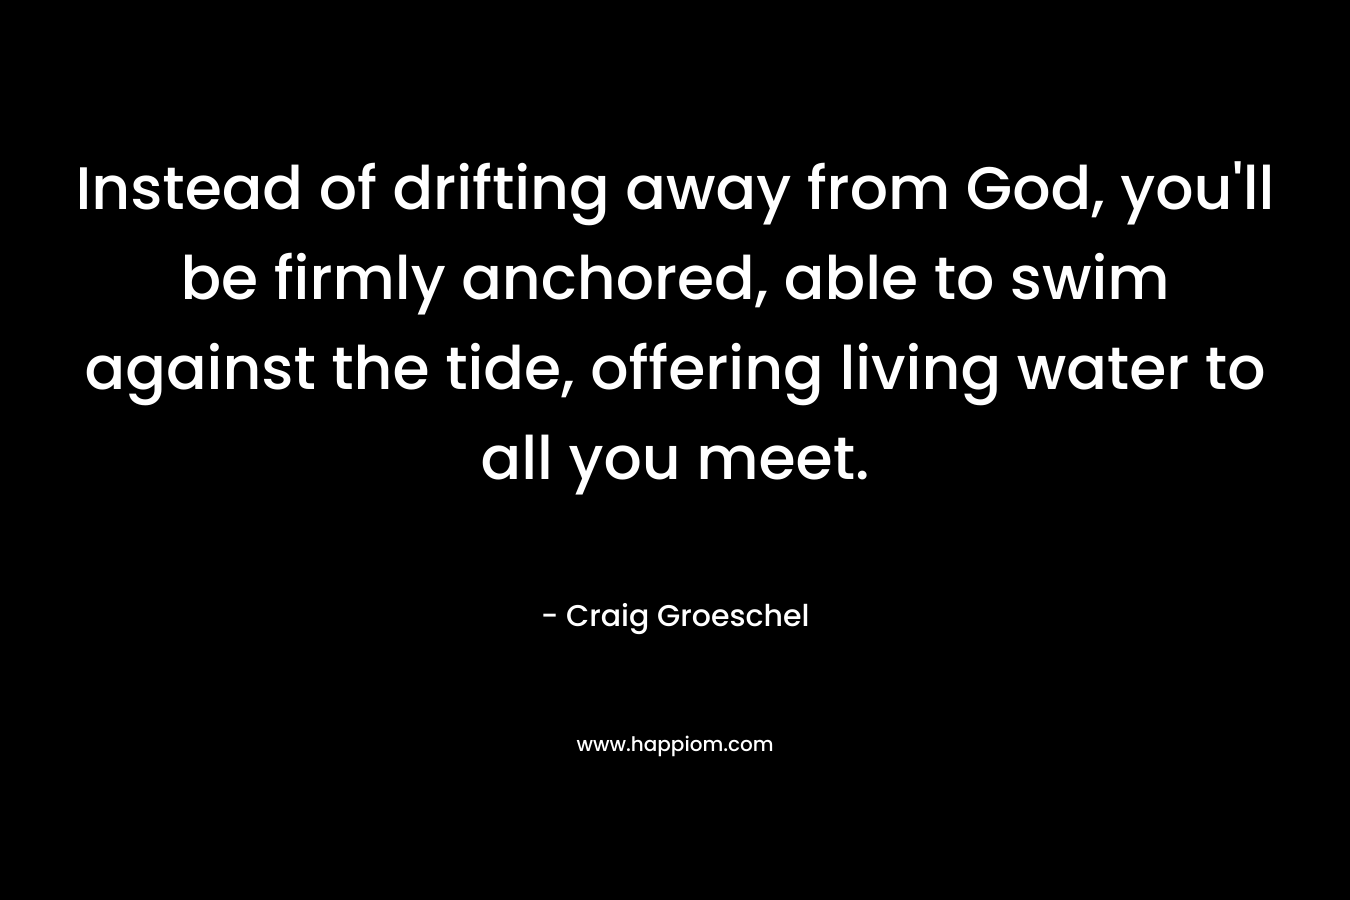 Instead of drifting away from God, you'll be firmly anchored, able to swim against the tide, offering living water to all you meet.